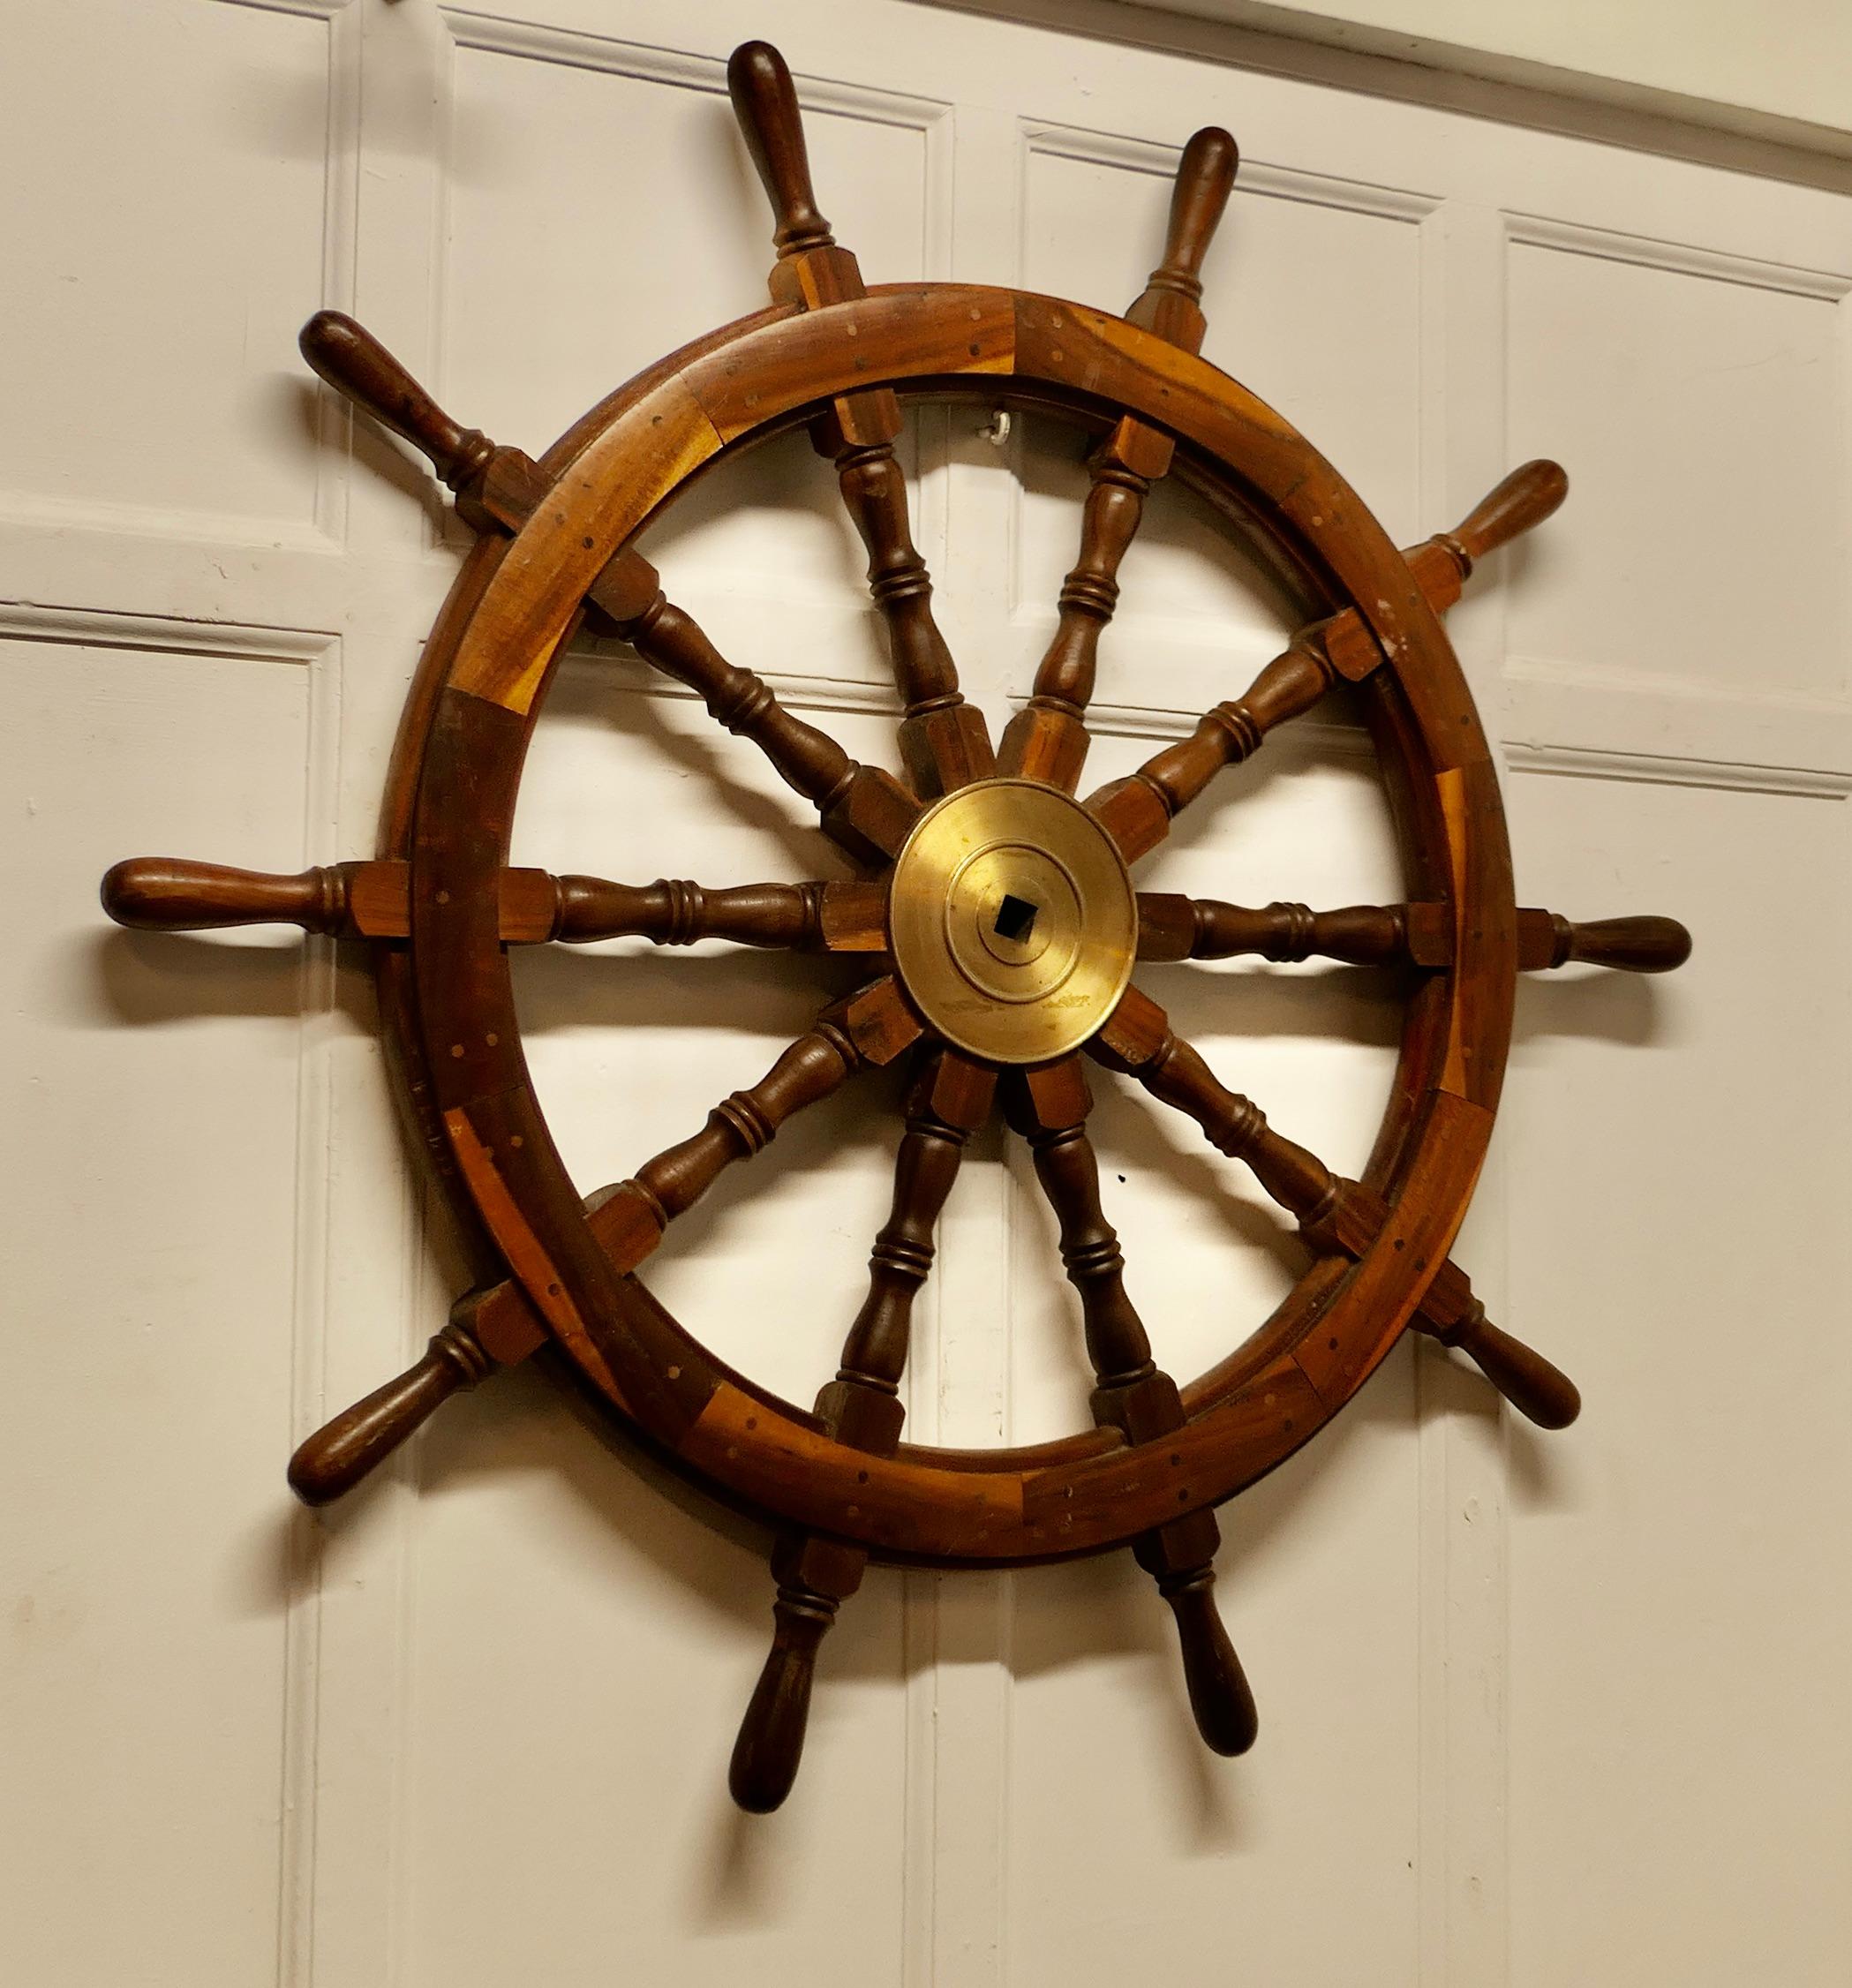 Large Mid 20th Century Teak Ships Wheel

A wonderful decorative piece, heavy and made in solid teak with Turned spindles radiating out from the central brass drum
The Wheel is 48” in diameter has 3” thick
TSC60